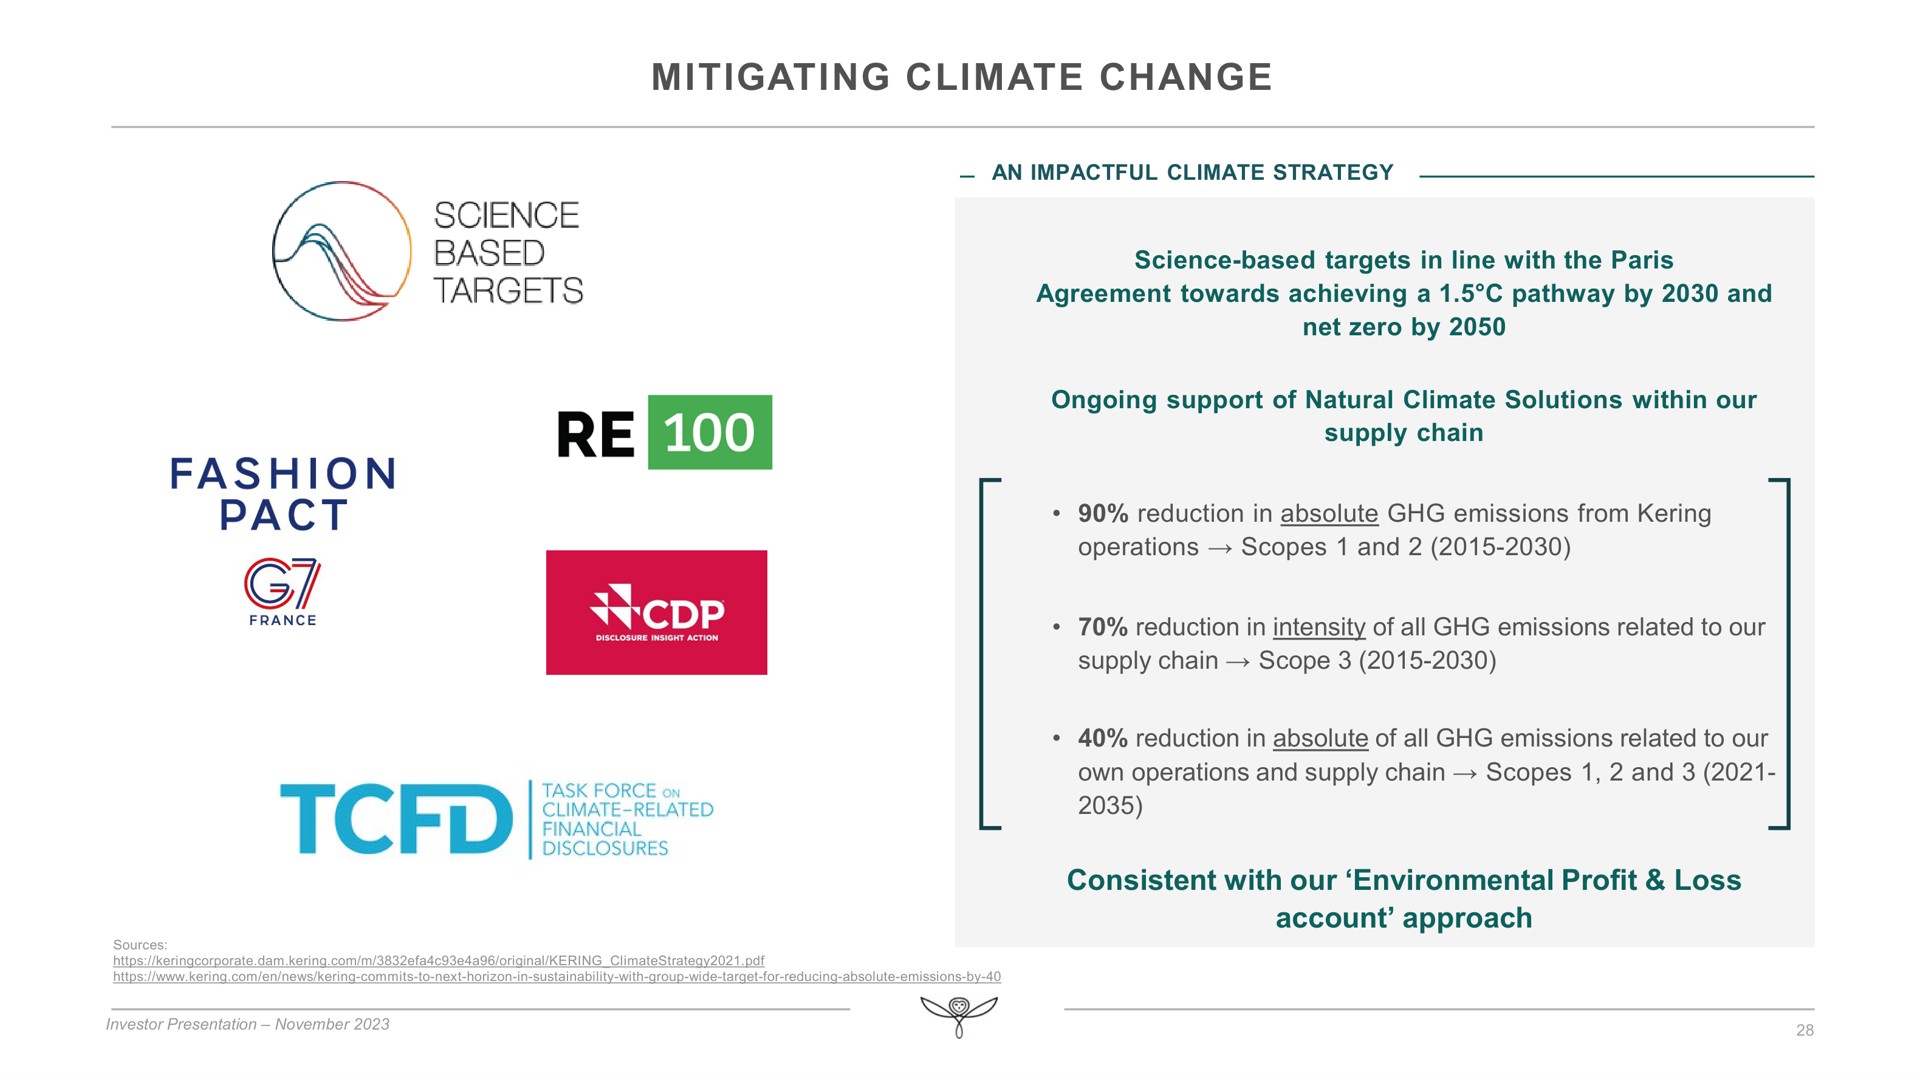 mitigating climate change consistent with our environmental profit loss account approach science fashion pact no | Kering